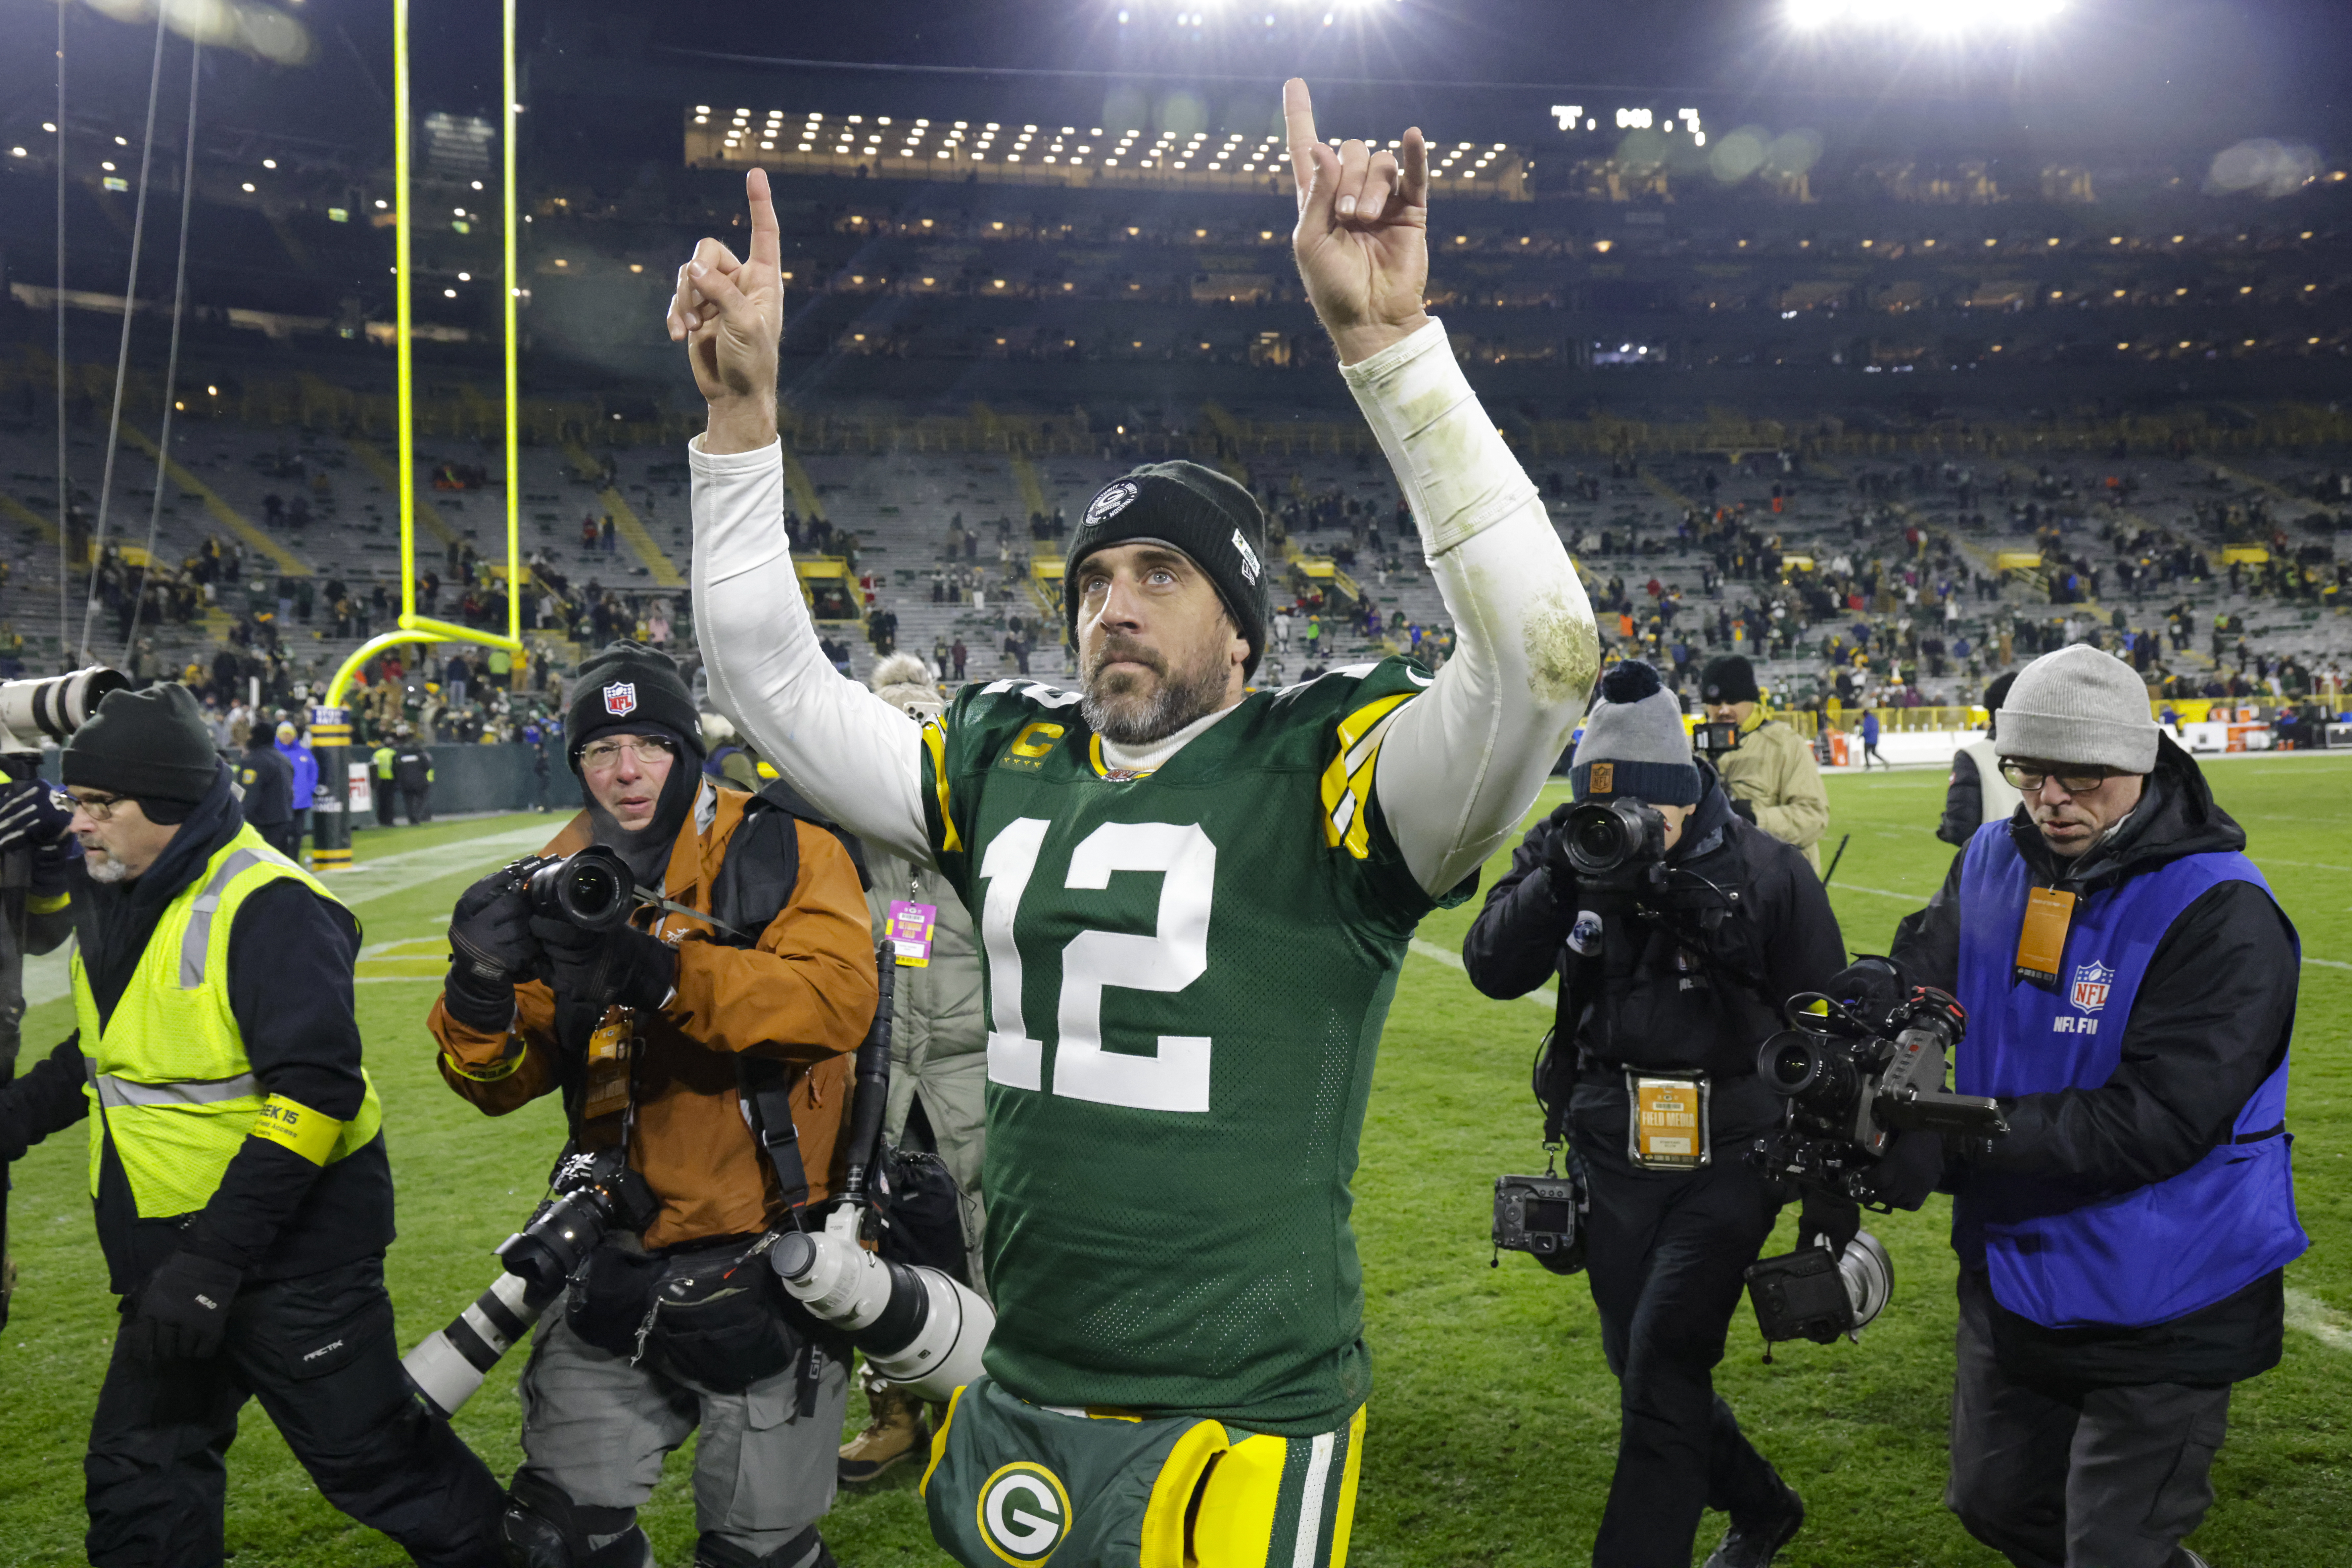 Packers def. Rams 24-12 on Monday Night Football to keep playoff